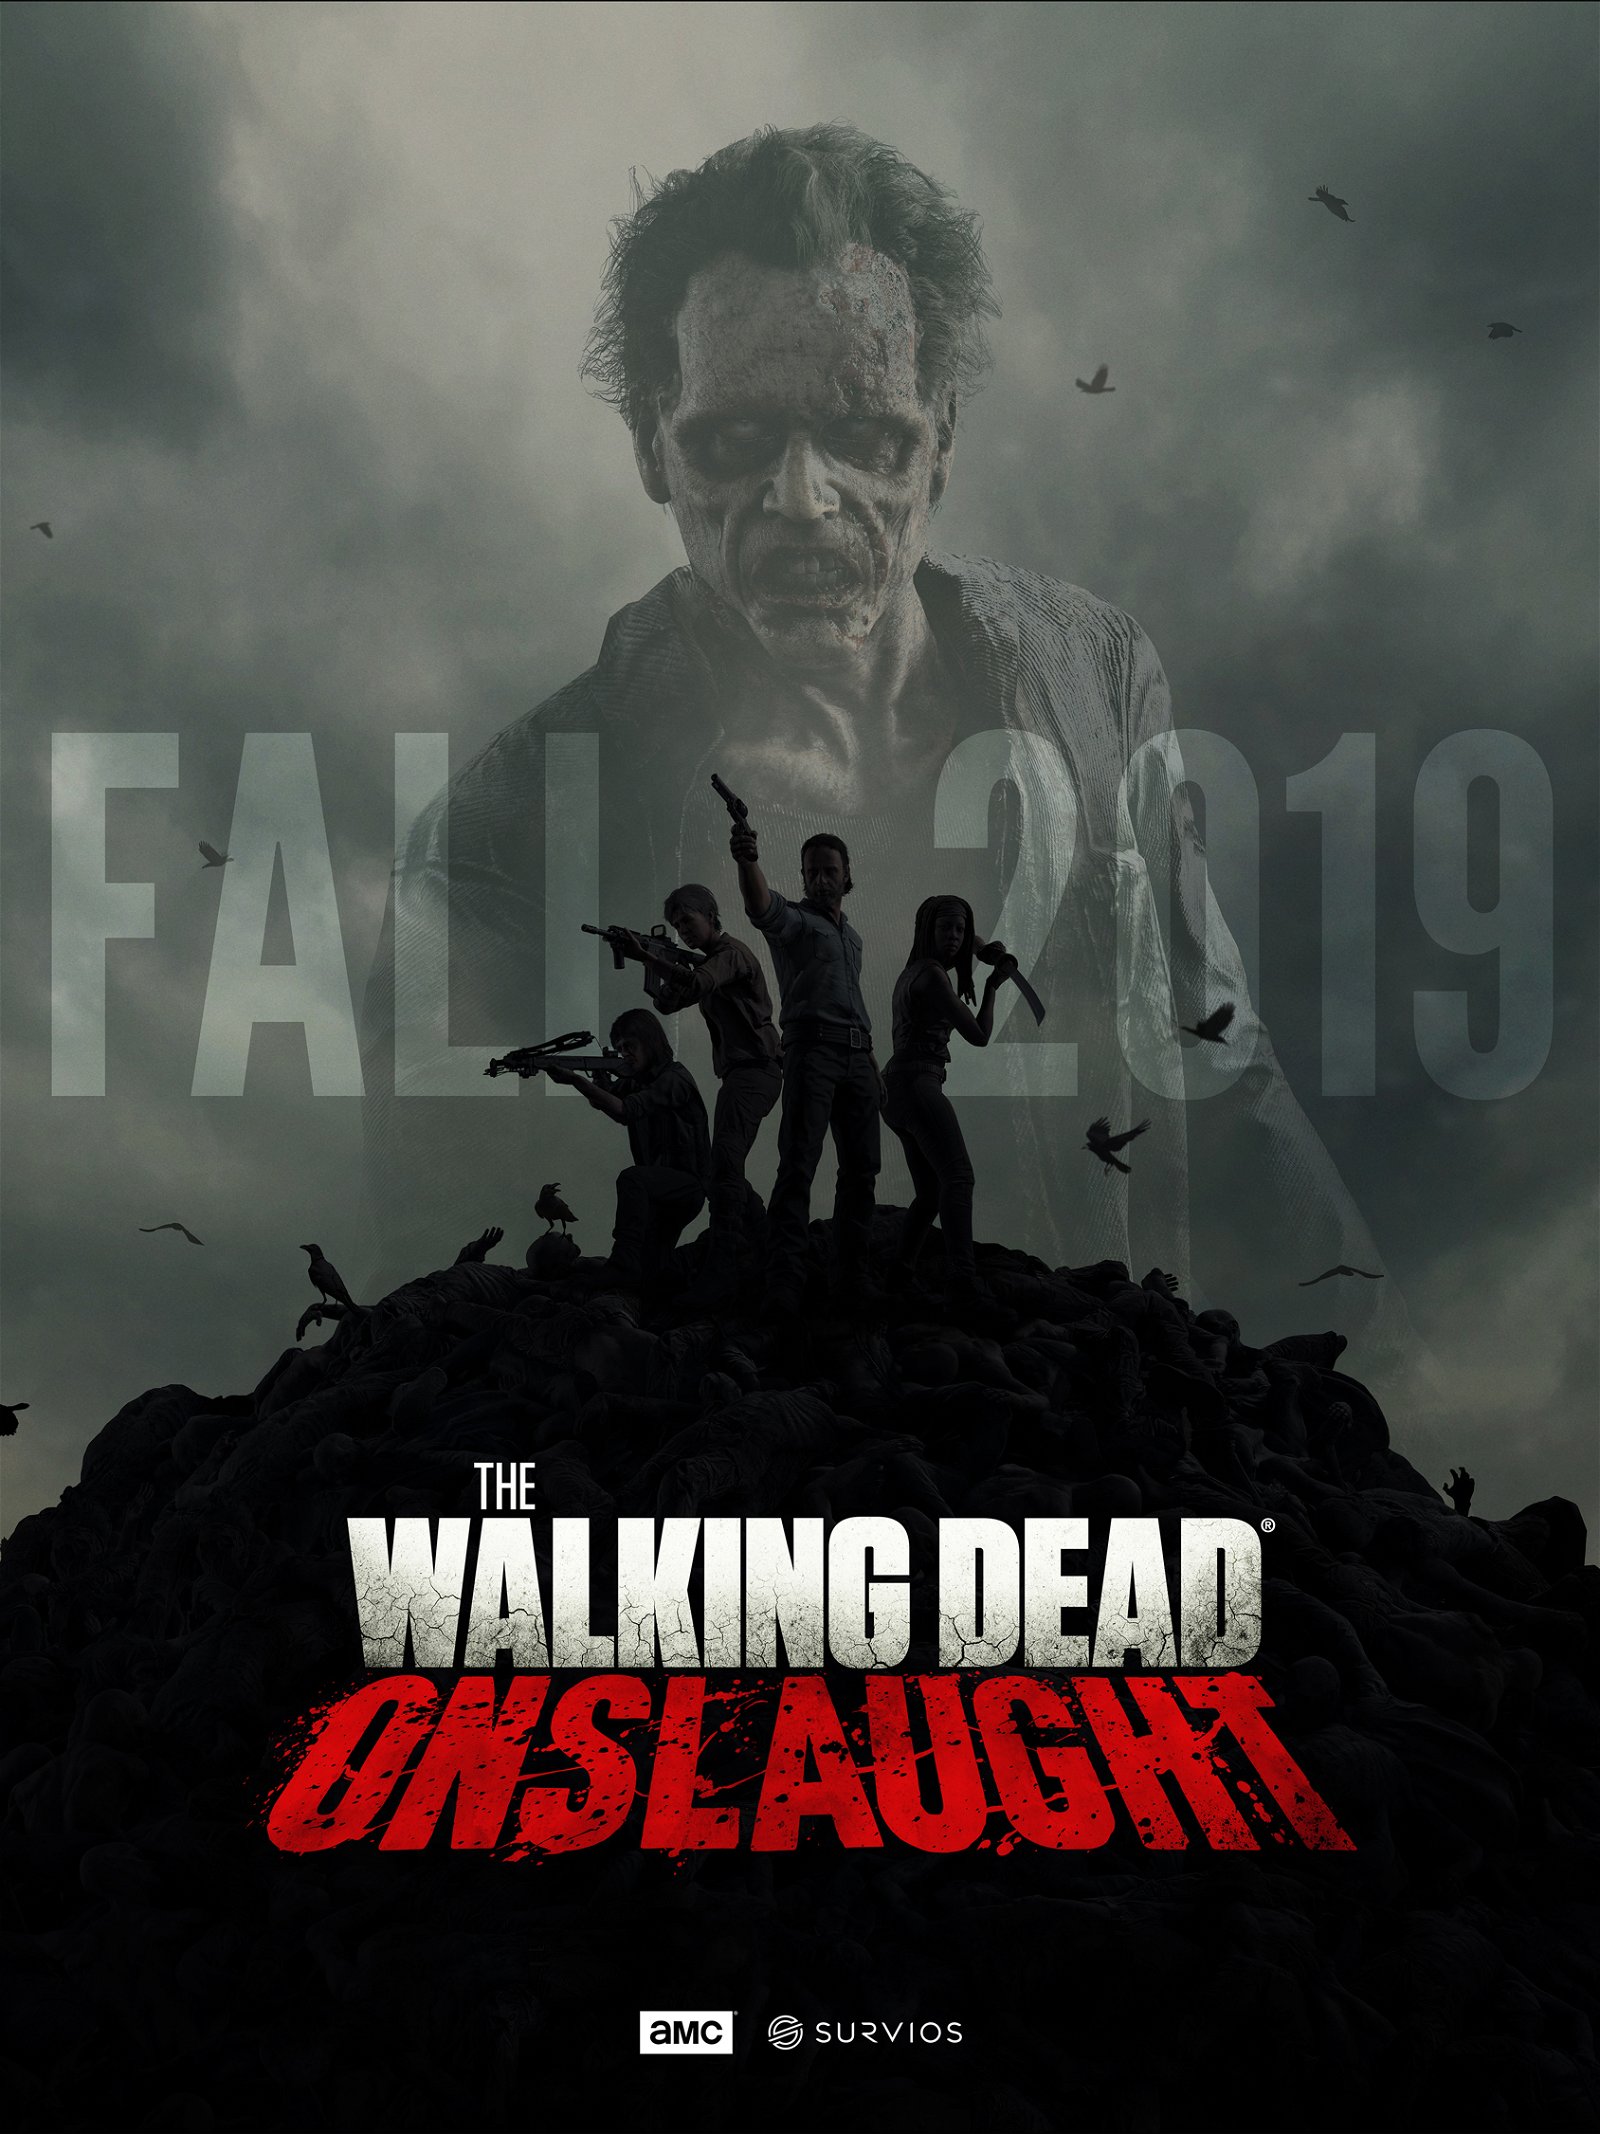 Image of The Walking Dead Onslaught